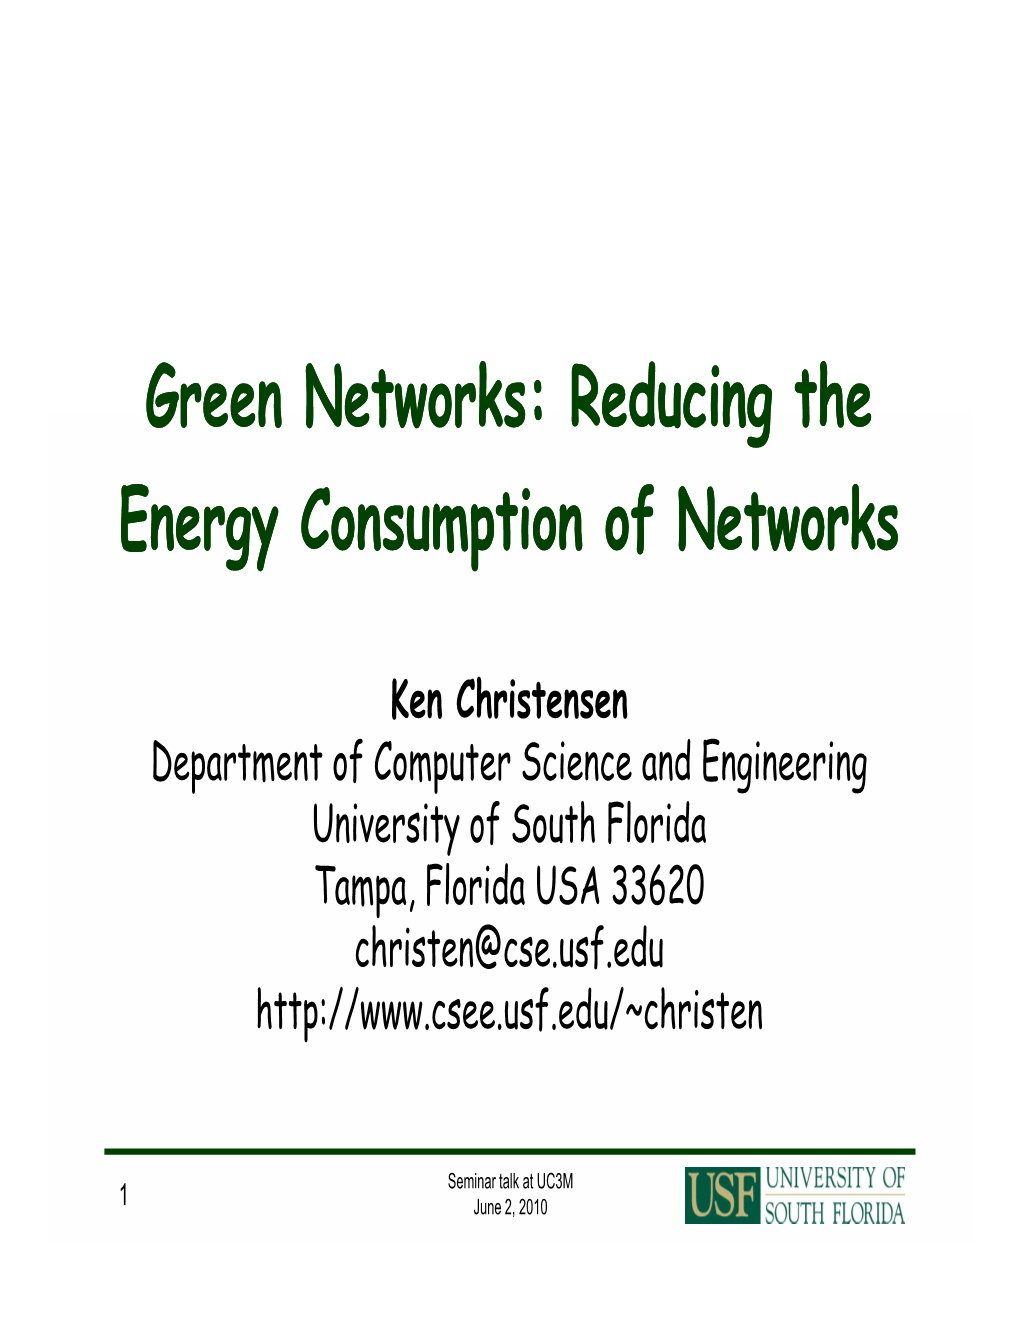 Reducing the Energy Consumption of Networks